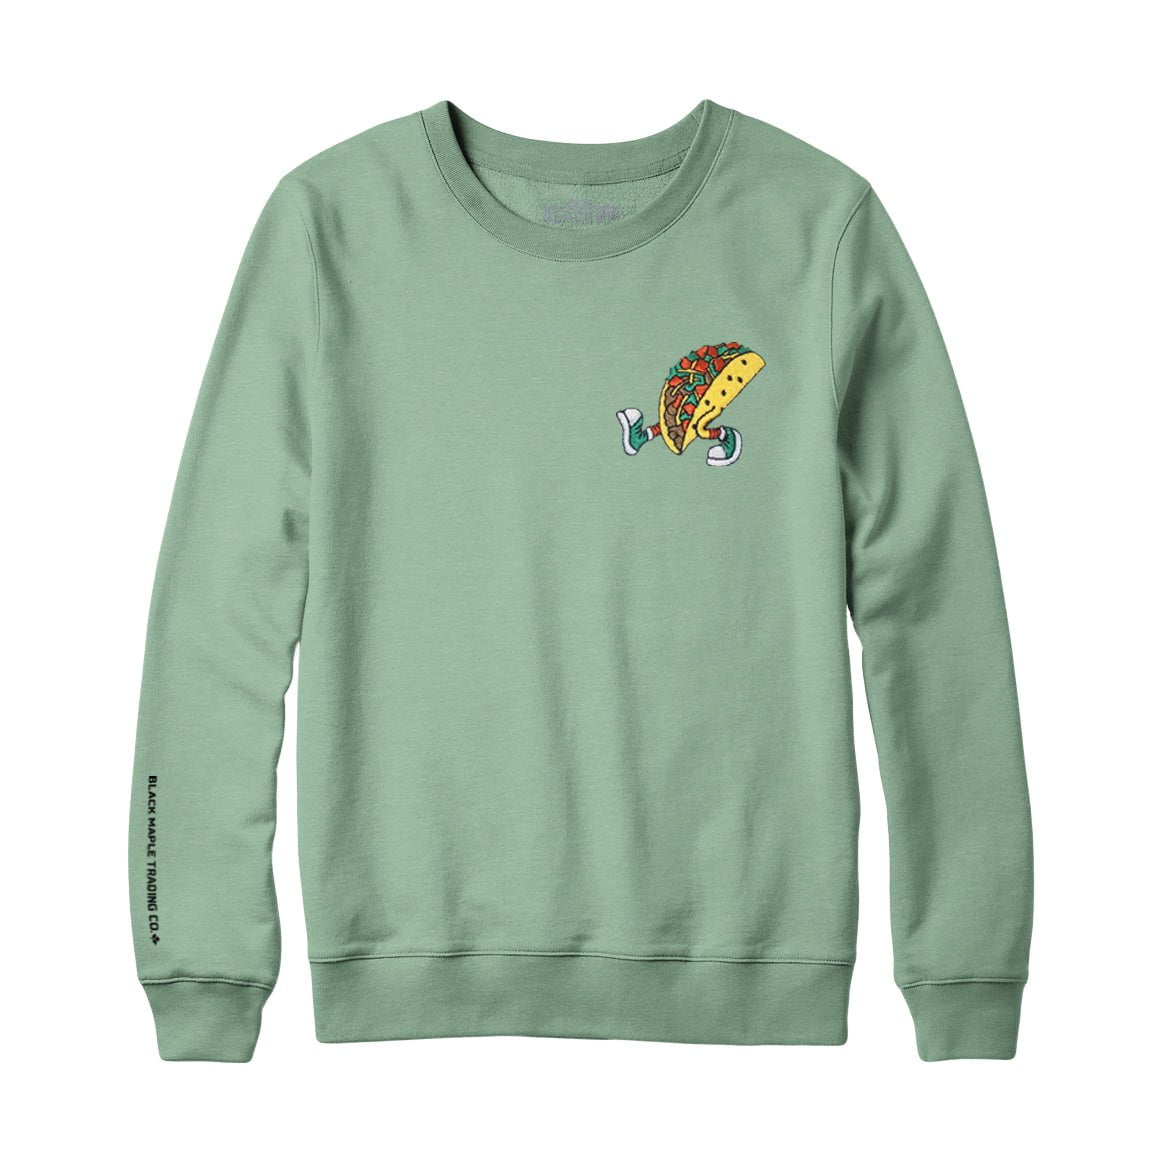 The Best Taco Embroidered Sweatshirt and Hoodie